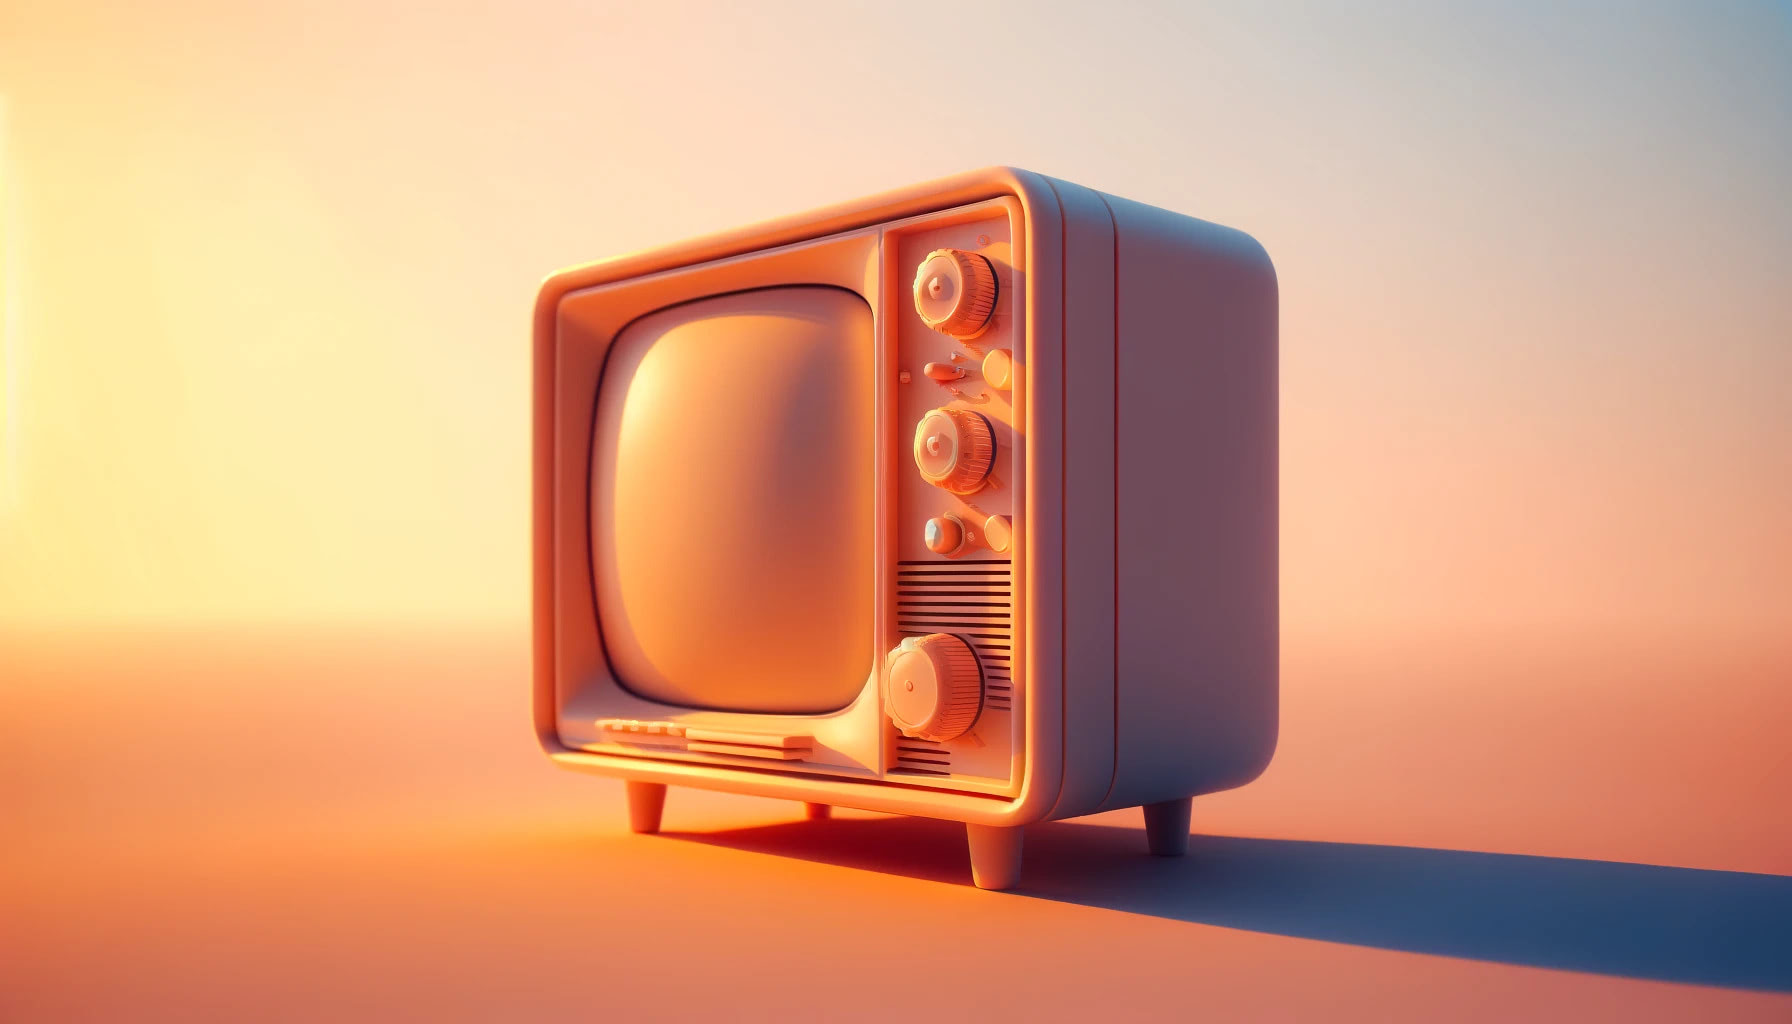 Abstract 3D representation of an old television set, bathed in the warm, soft colors of a summer dawn, with hues of orange, pink, and light blue highlighting the nostalgic design.